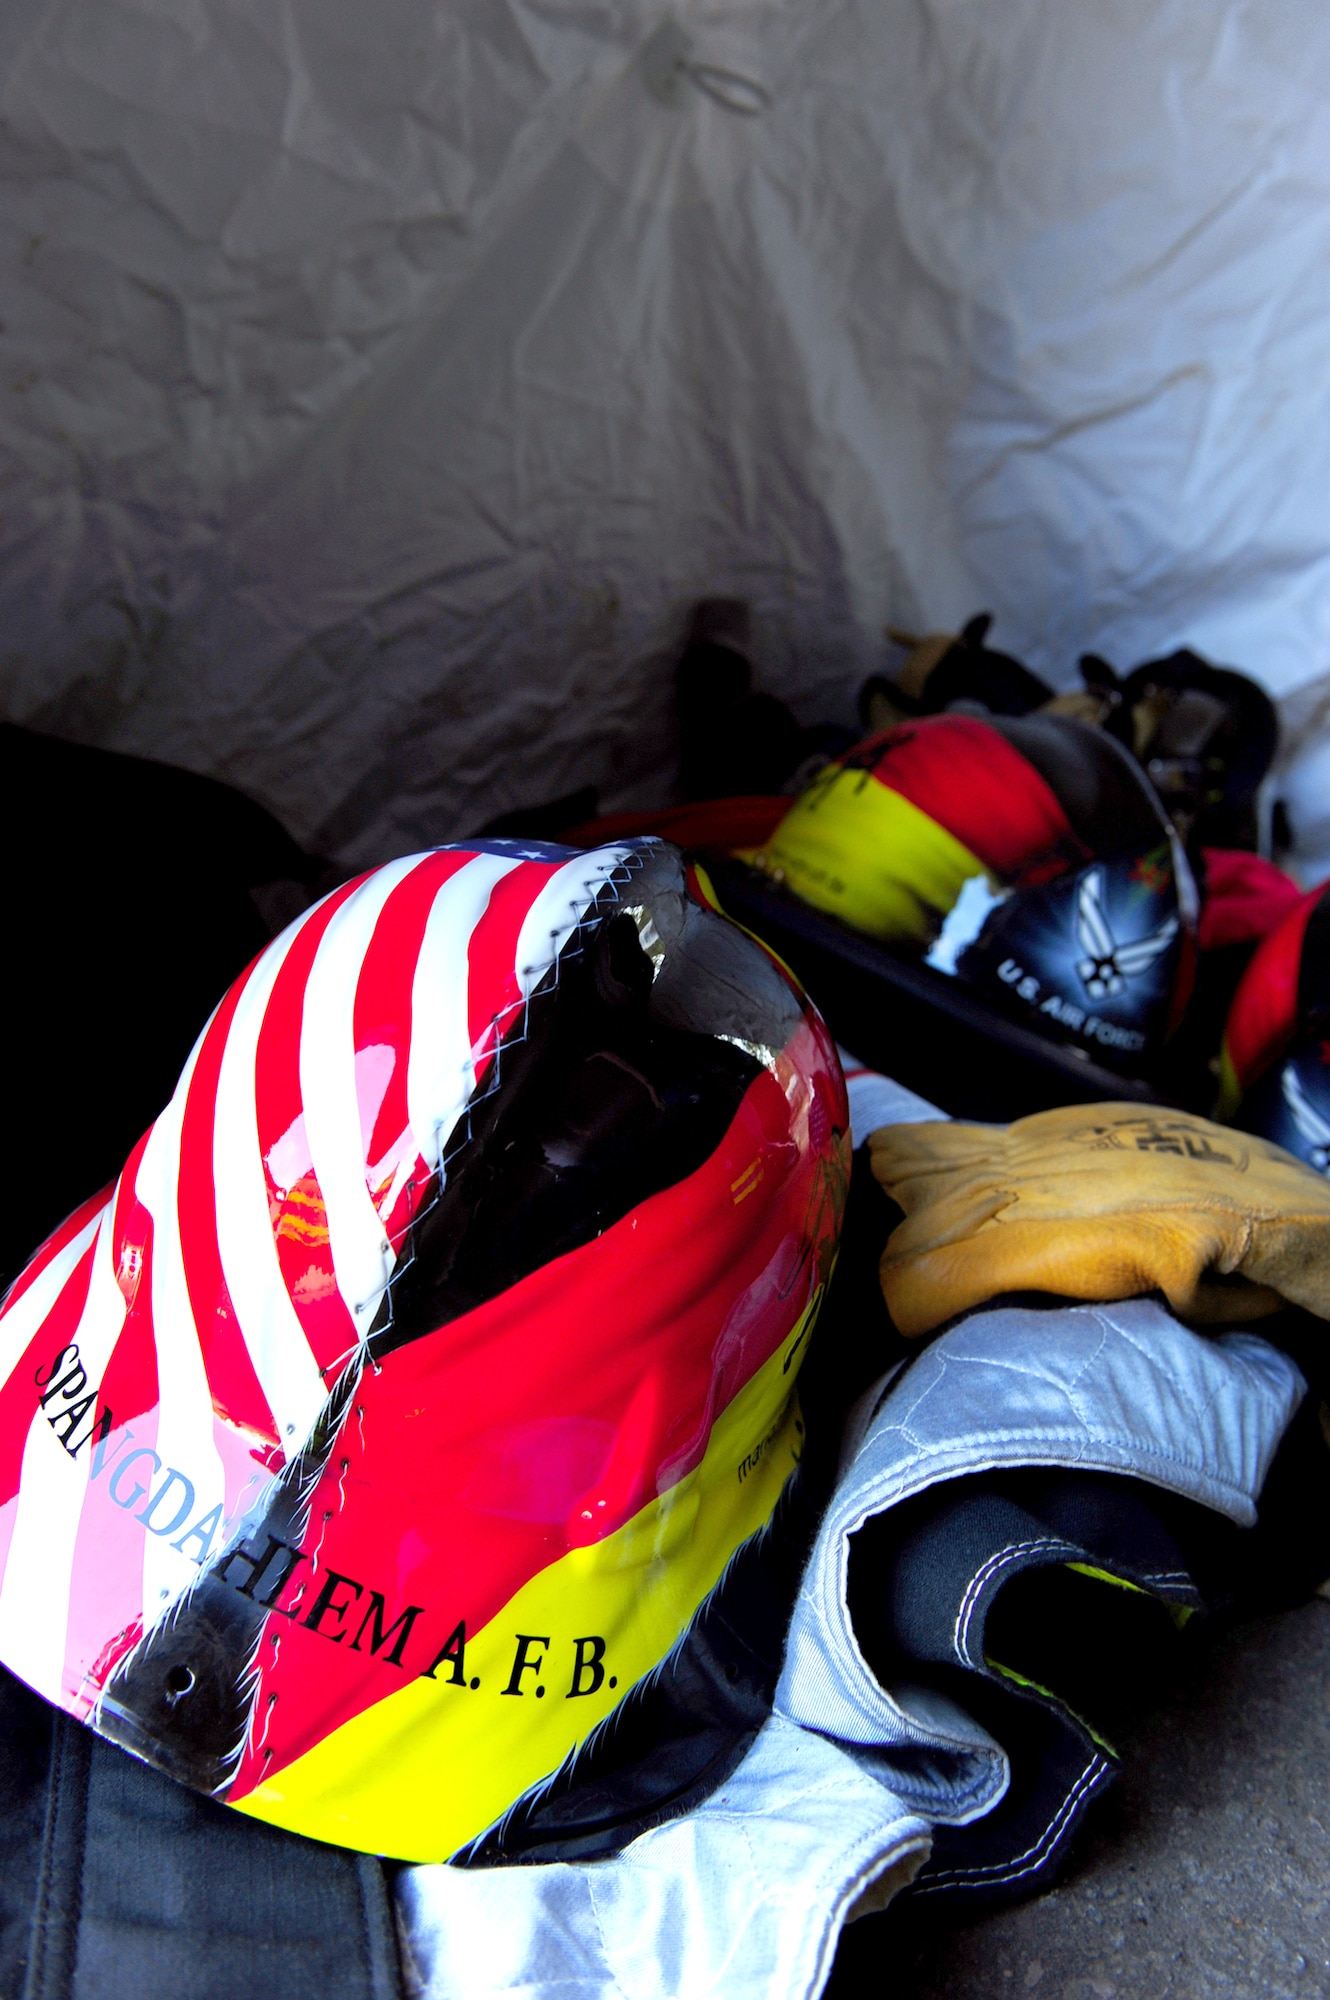 U.S. Air Forces in Europe firefighter helmets lay in a tent during a Firefighter Combat Challenge Oct. 9, 2010 at the 435th Construction and Training Squadron contingency training site at Ramstein Air Base, Germany. The competition consisted of a timed, five-part obstacle course. (U.S. Air Force photo/Airman 1st Class Brea Miller)